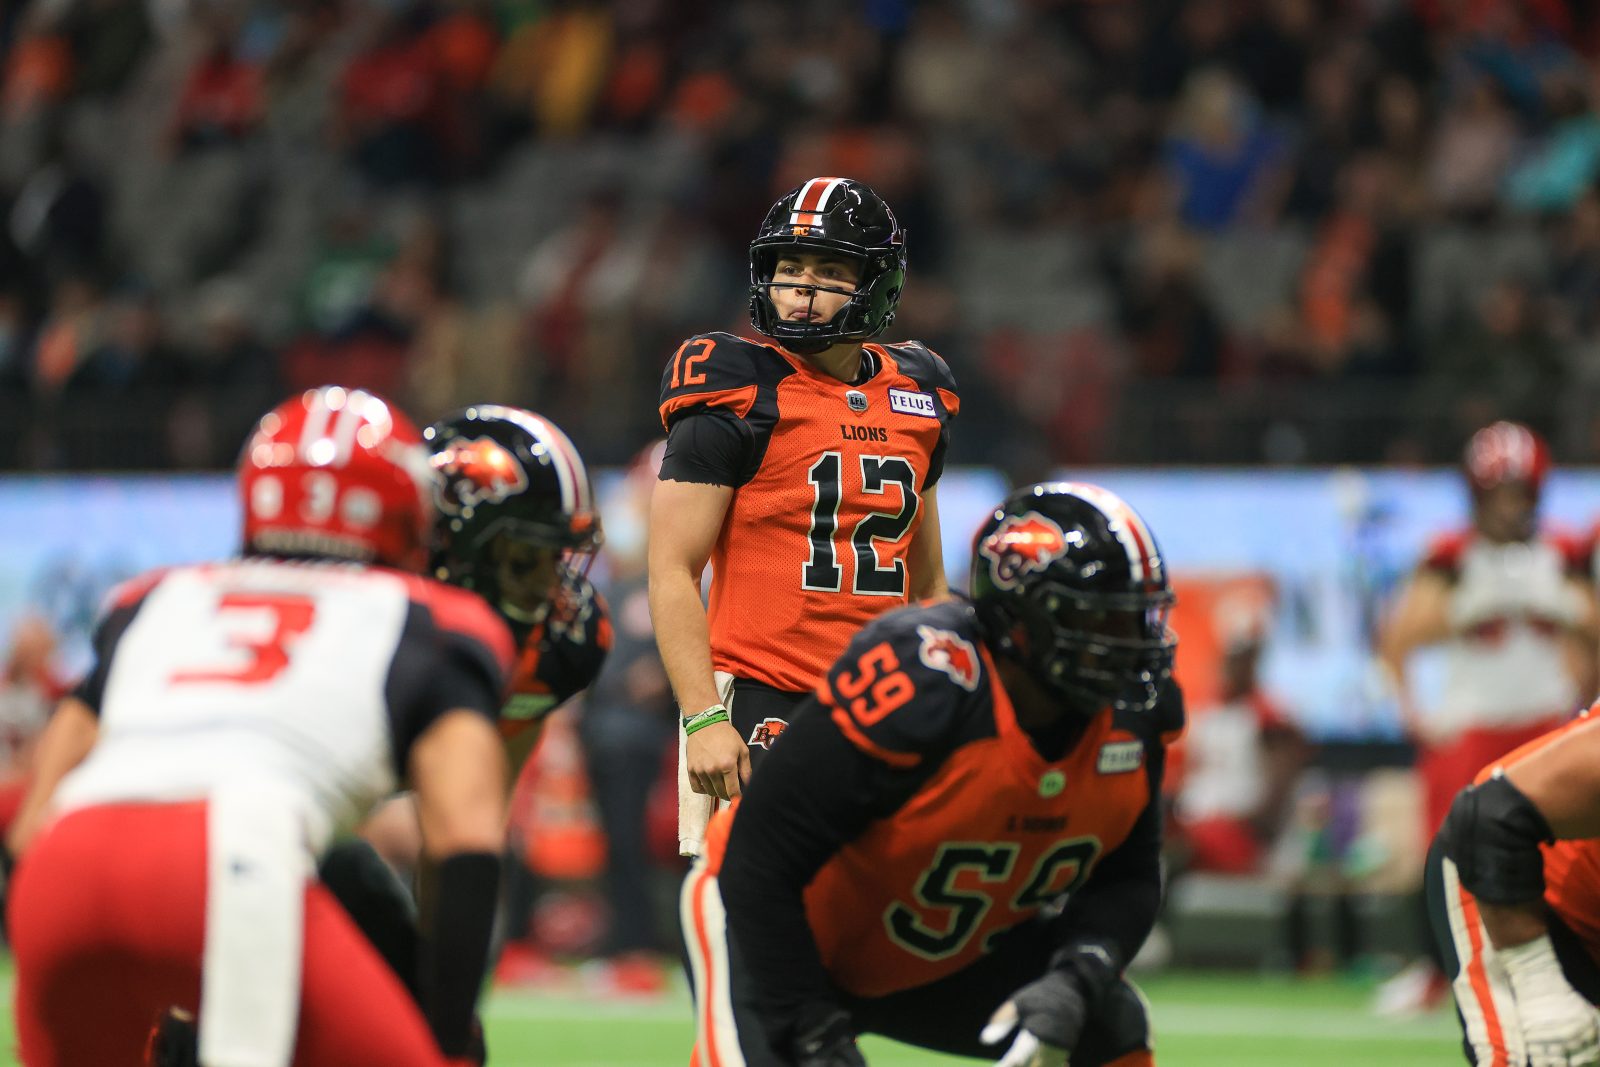 Watching and learning | In 2021 Rourke spent a lot of time watching, and learning from the sidelines and looks to implement the lessons of last year in 2022. | BC Lions